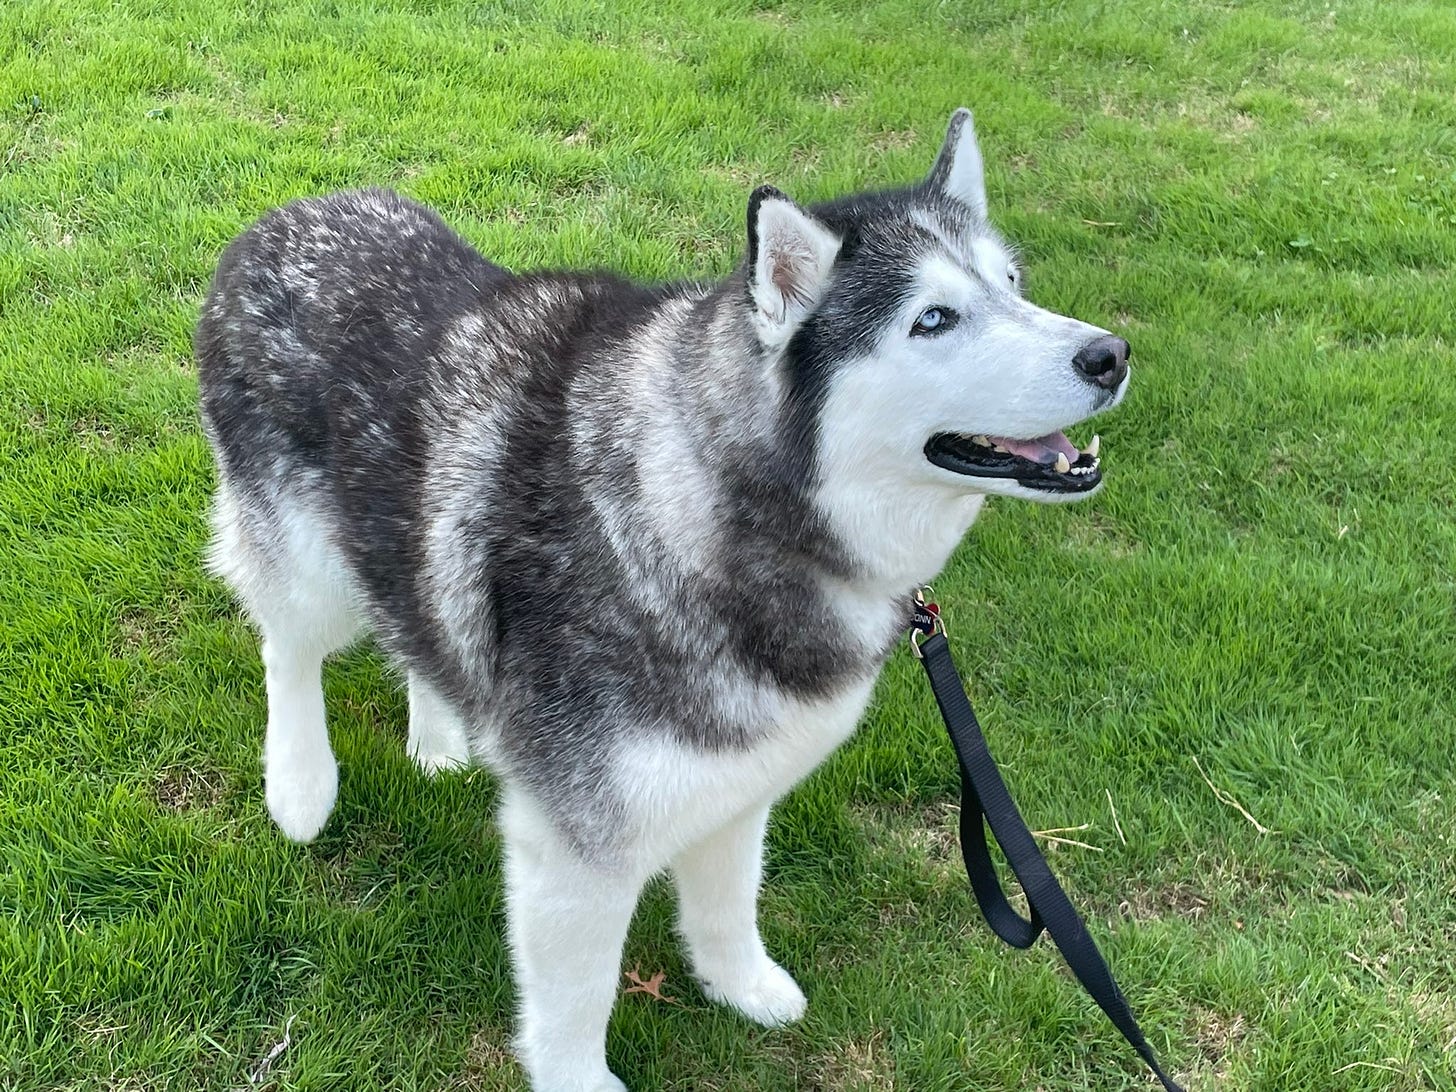 Jonathan the Husky, UConn’s mascot, looking up and to the right